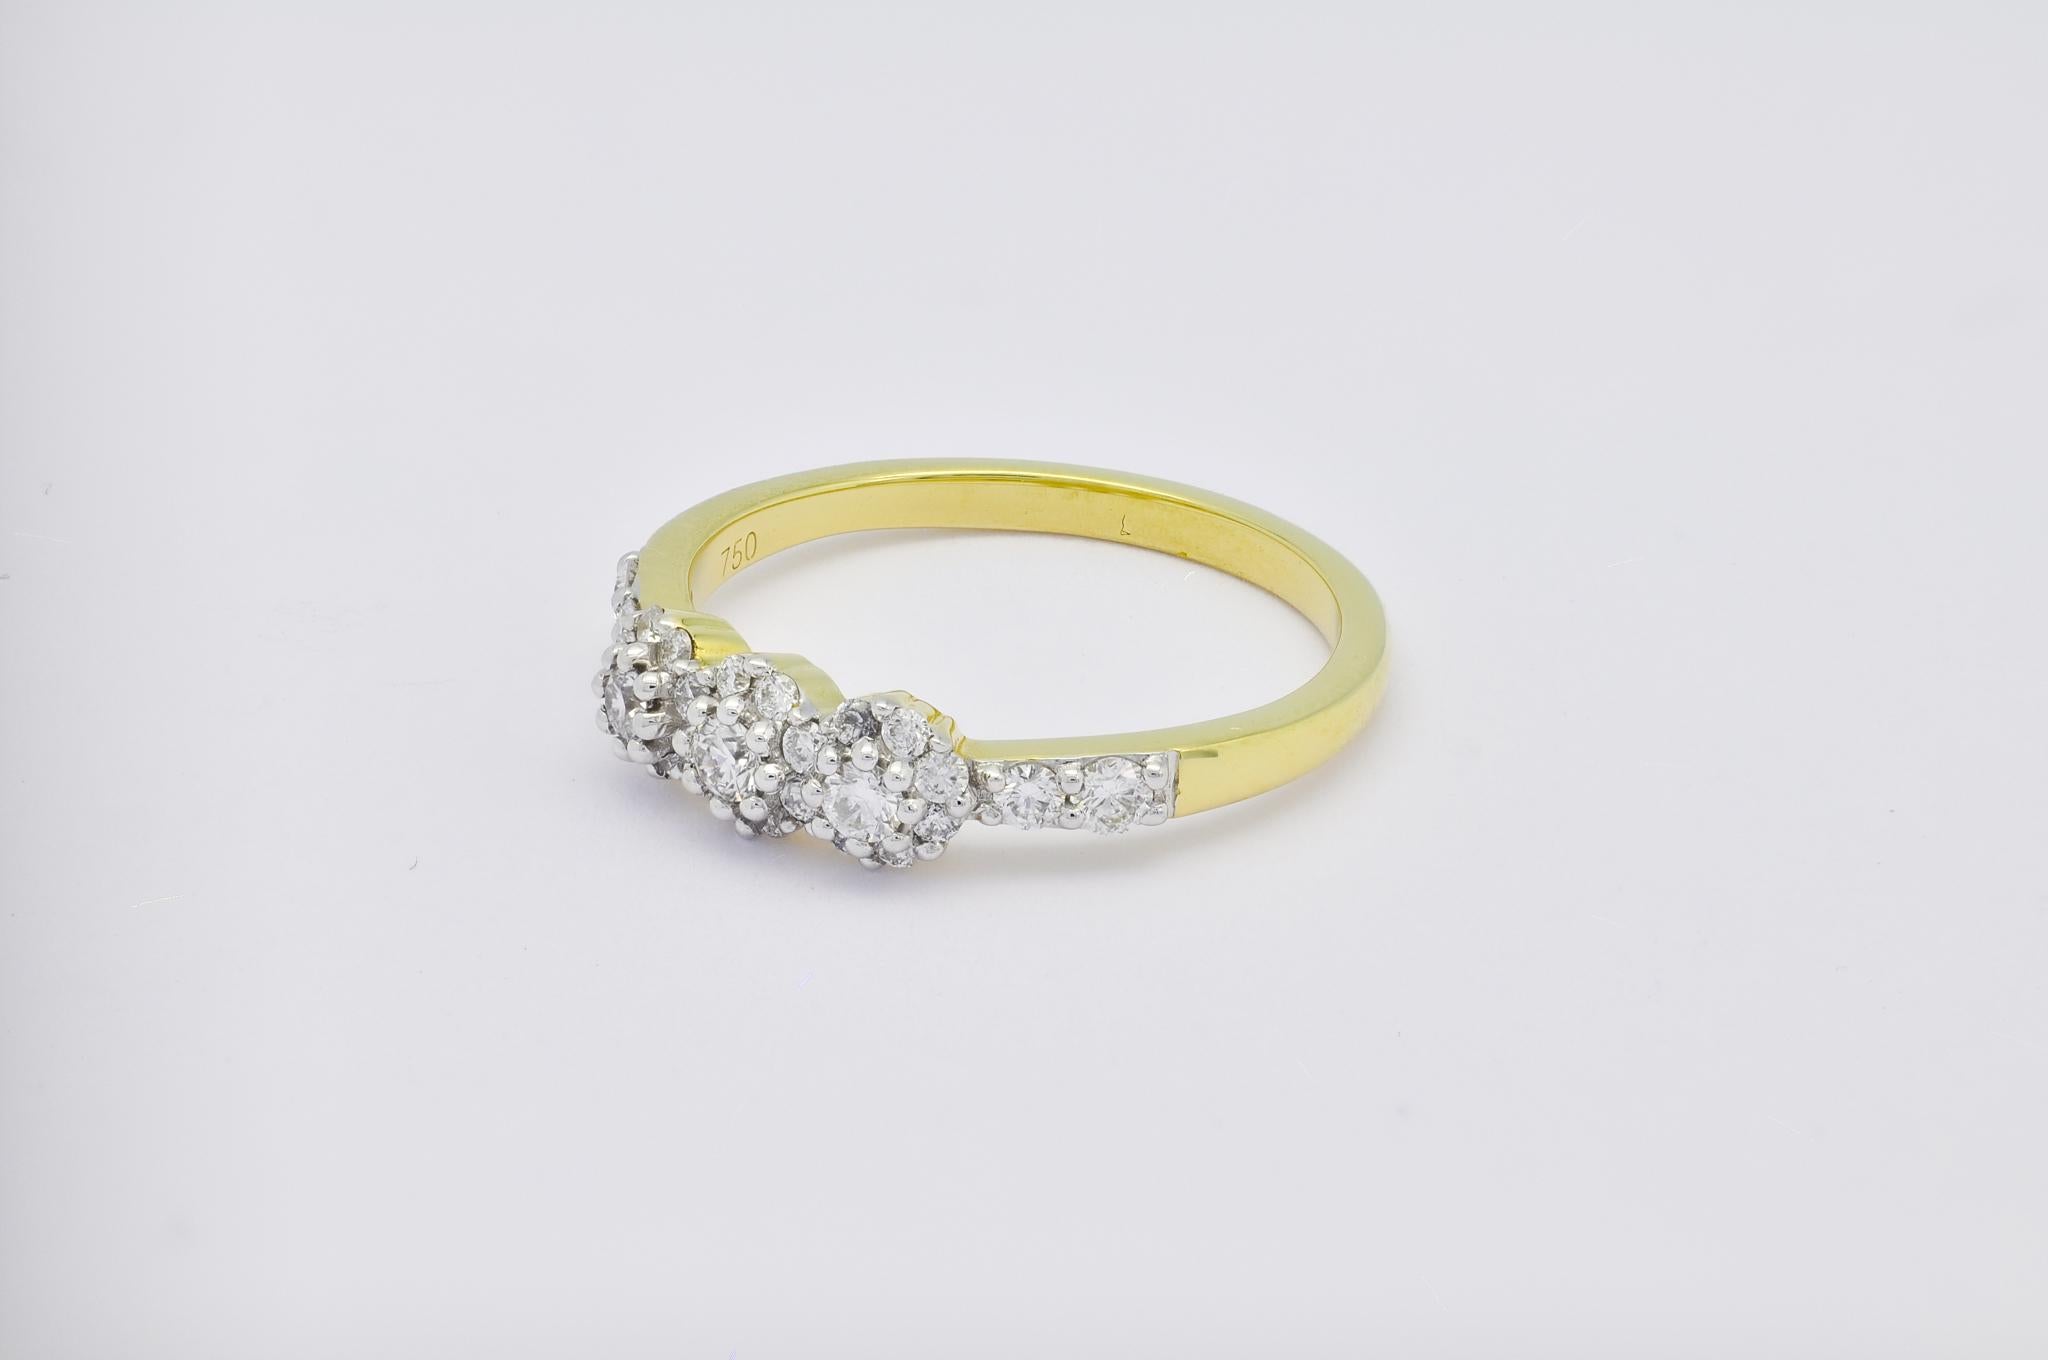 Brilliant Cut Natural Diamond 0.52 cts  18 karat Yellow Gold 3 Cluster Ring  For Sale